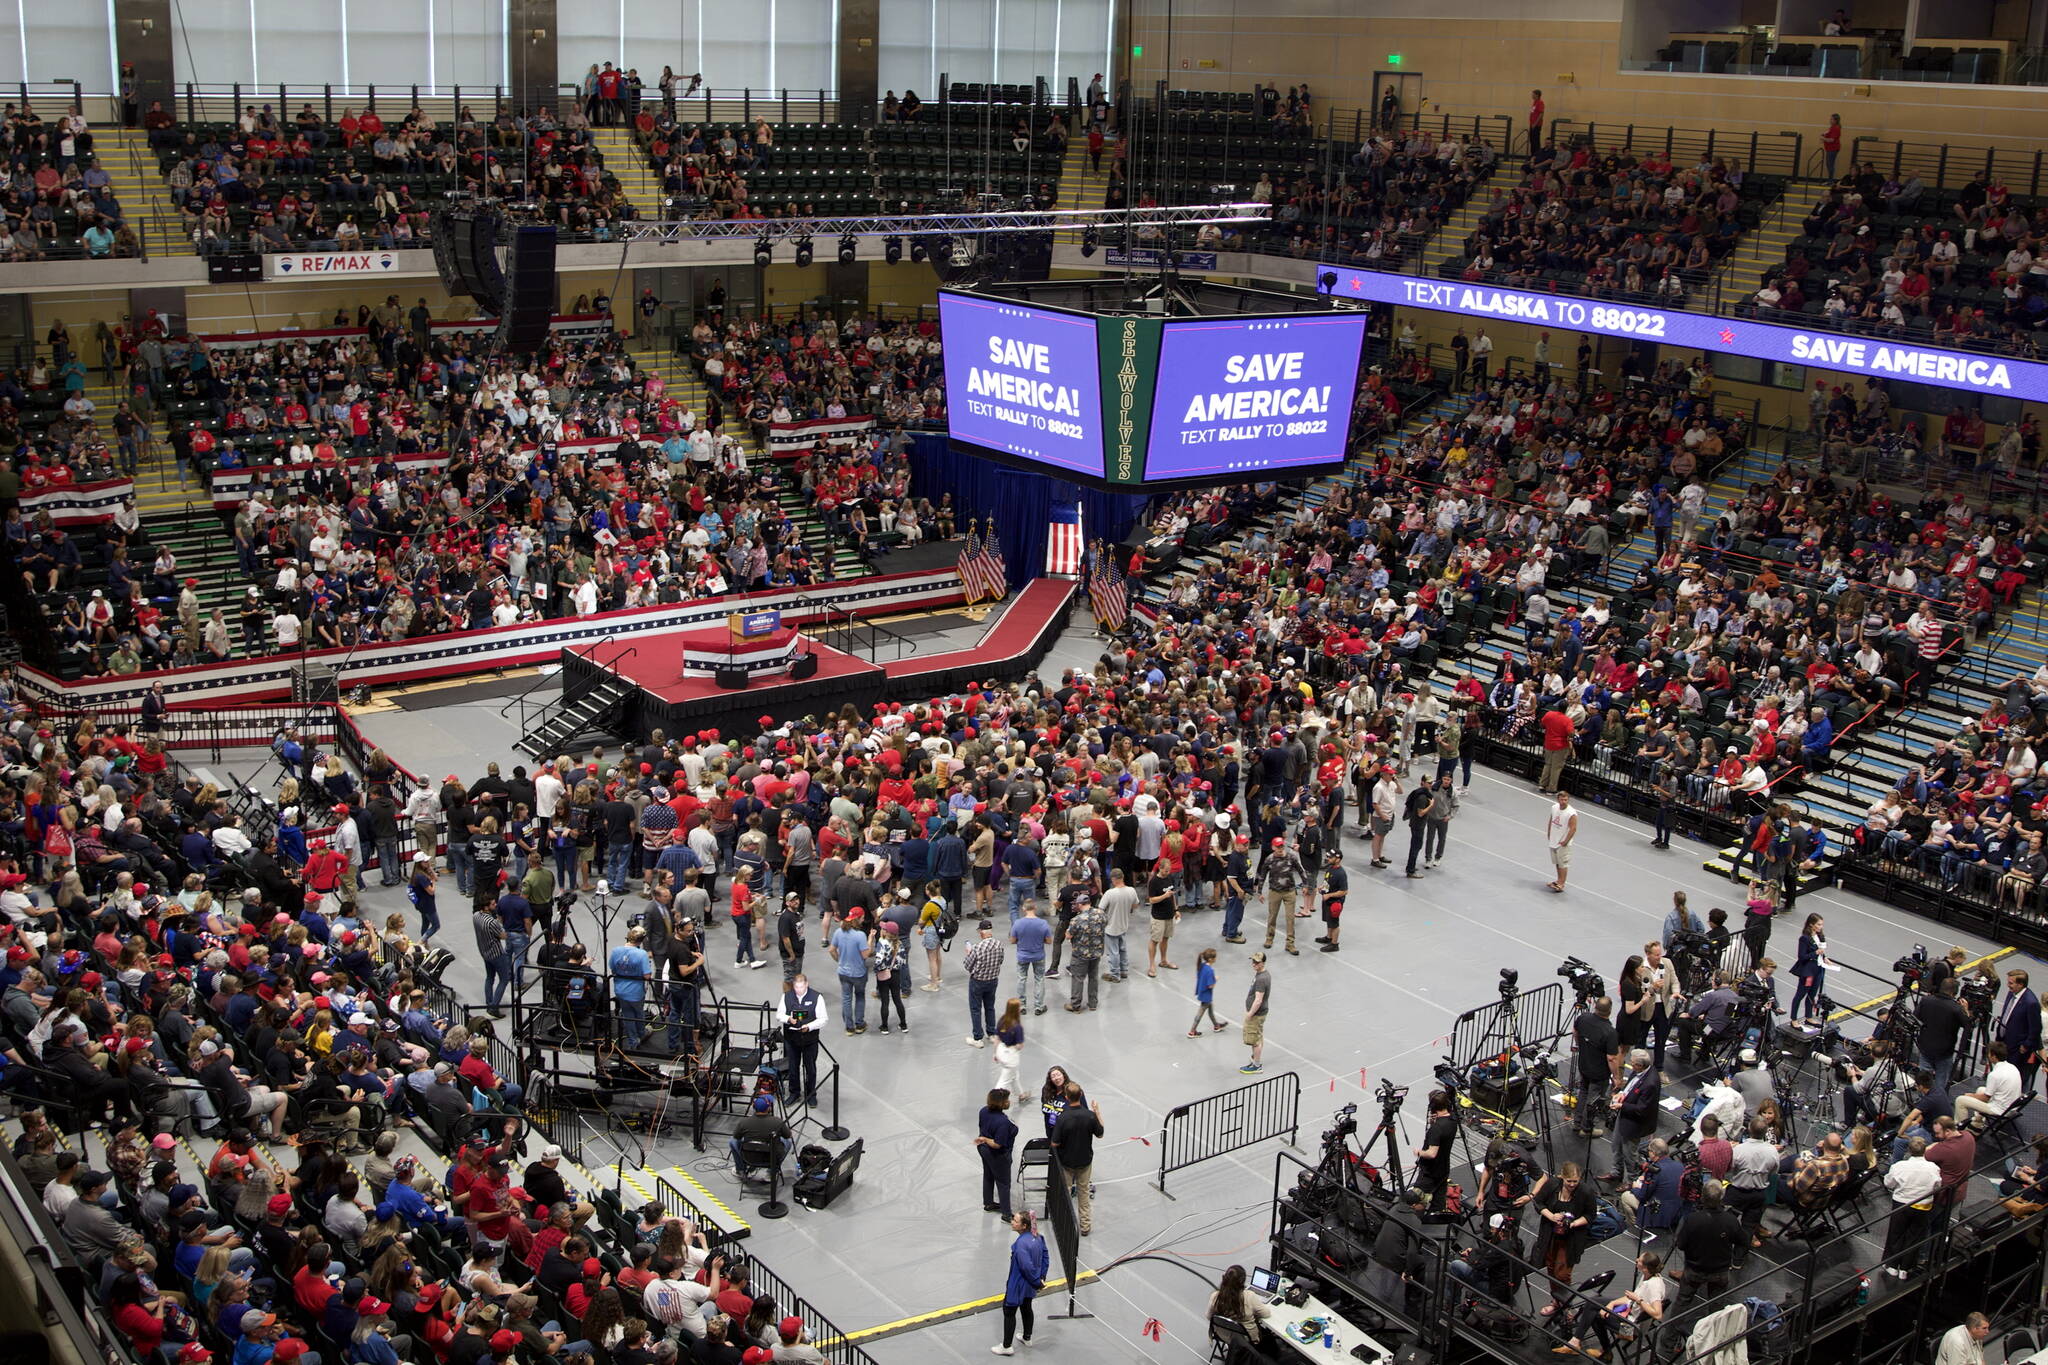 Rally-goers stream into the Alaska Airlines Center Saturday afternoon. By the time former President Donald Trump took the stage shortly before 5 p.m., the arena was full. (Mark Sabbatini / Juneau Empire)